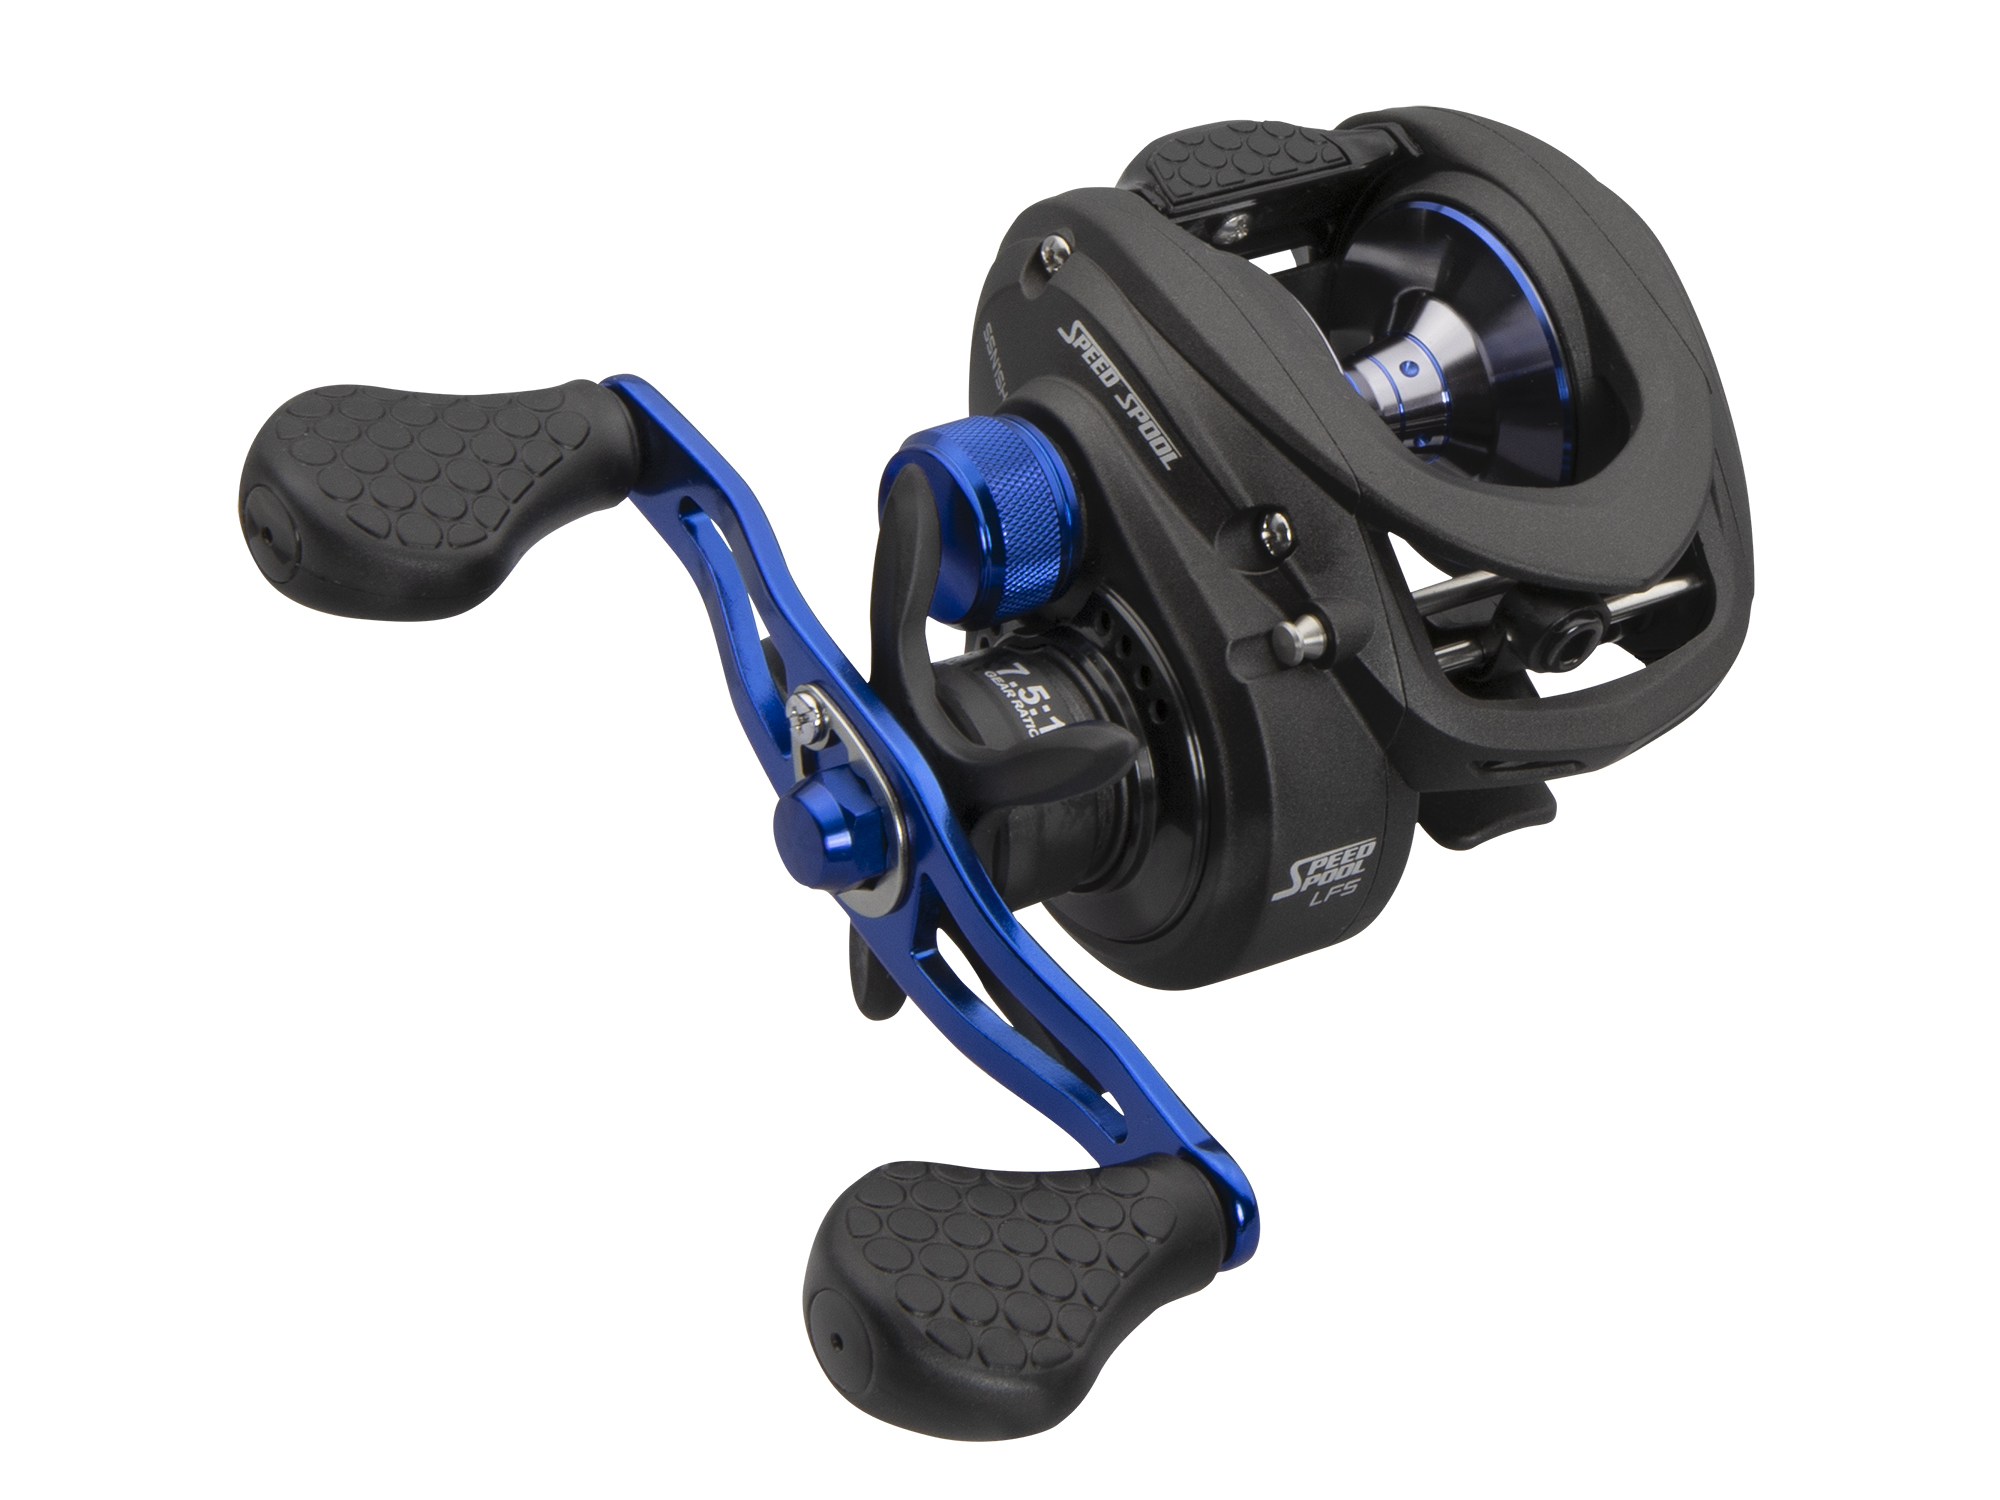 What are your thoughts on Googan's new baitcasters